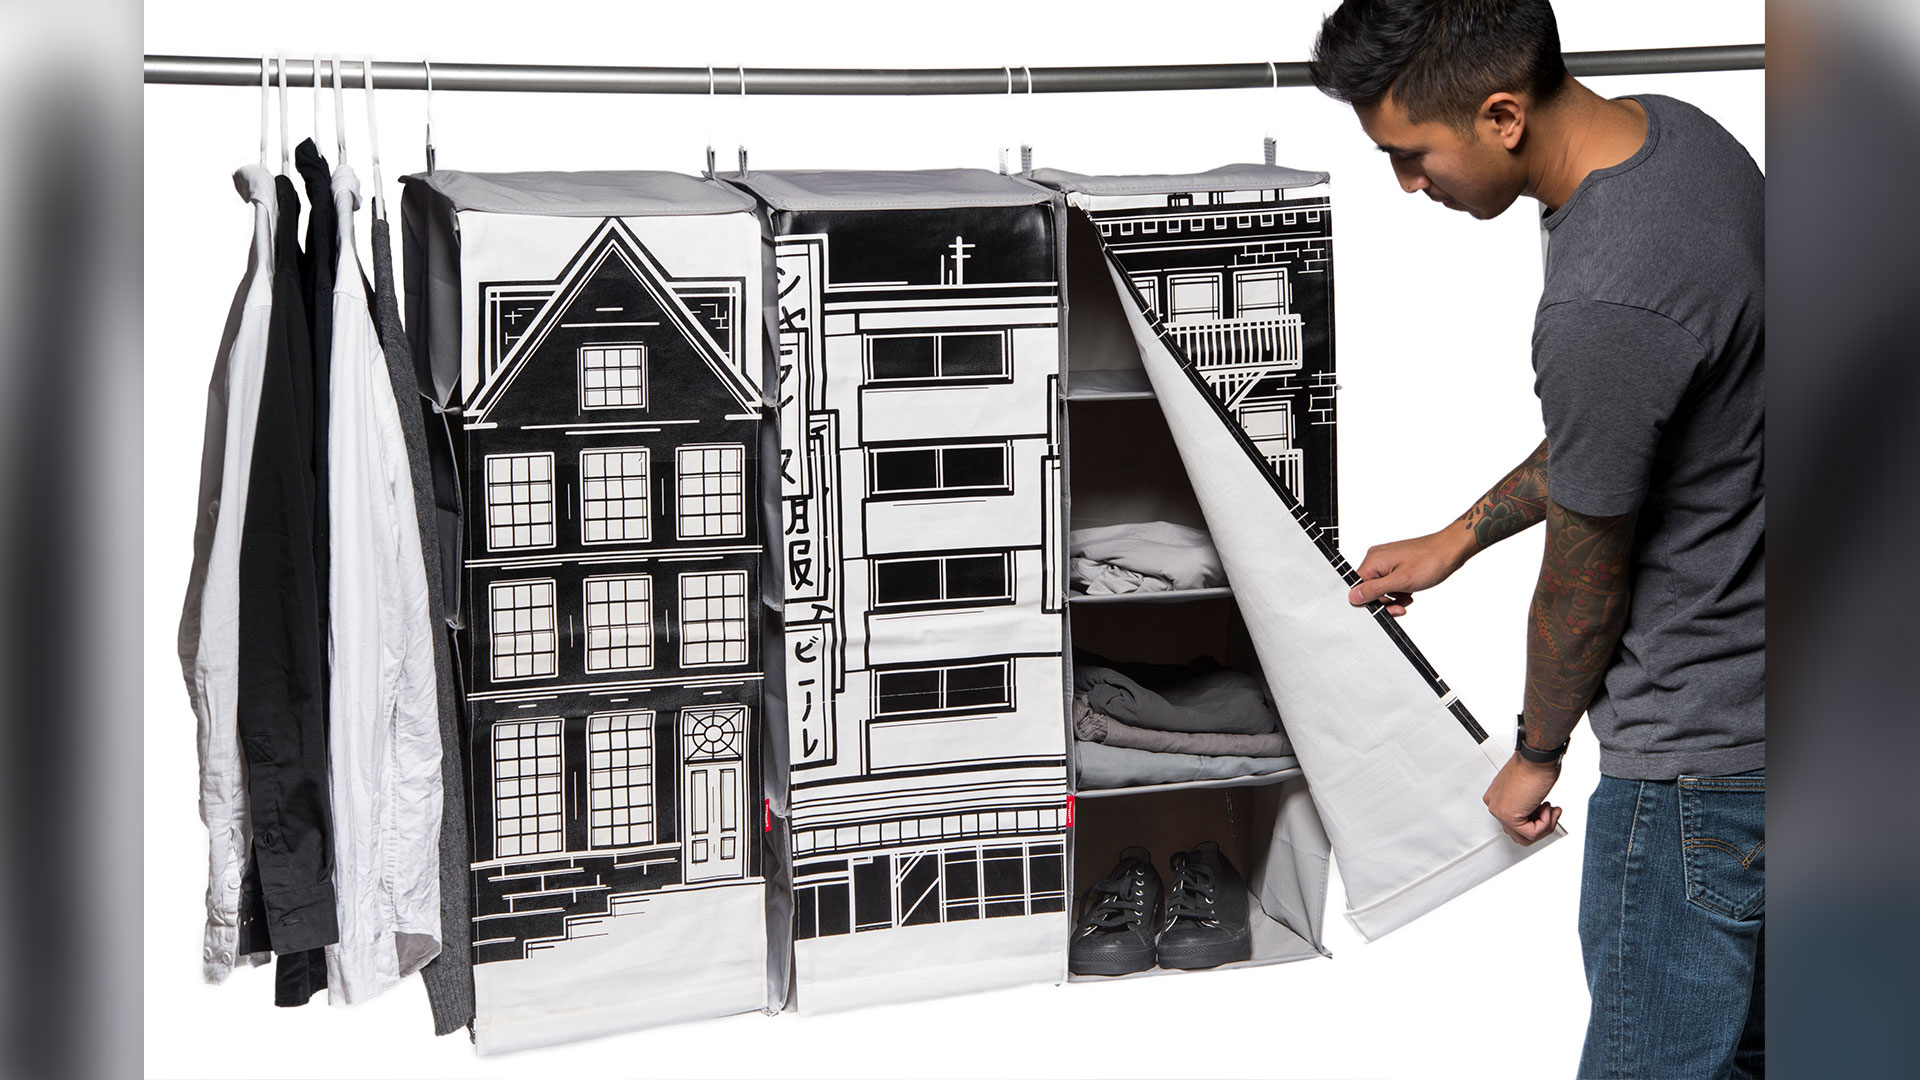 Front view of a series of 3 closet organizers hanging on long pole, each designed to look like city building facades in black and white, student opening front flap of organizer to show 3 interior vertical shelves with assorted clothing items folded